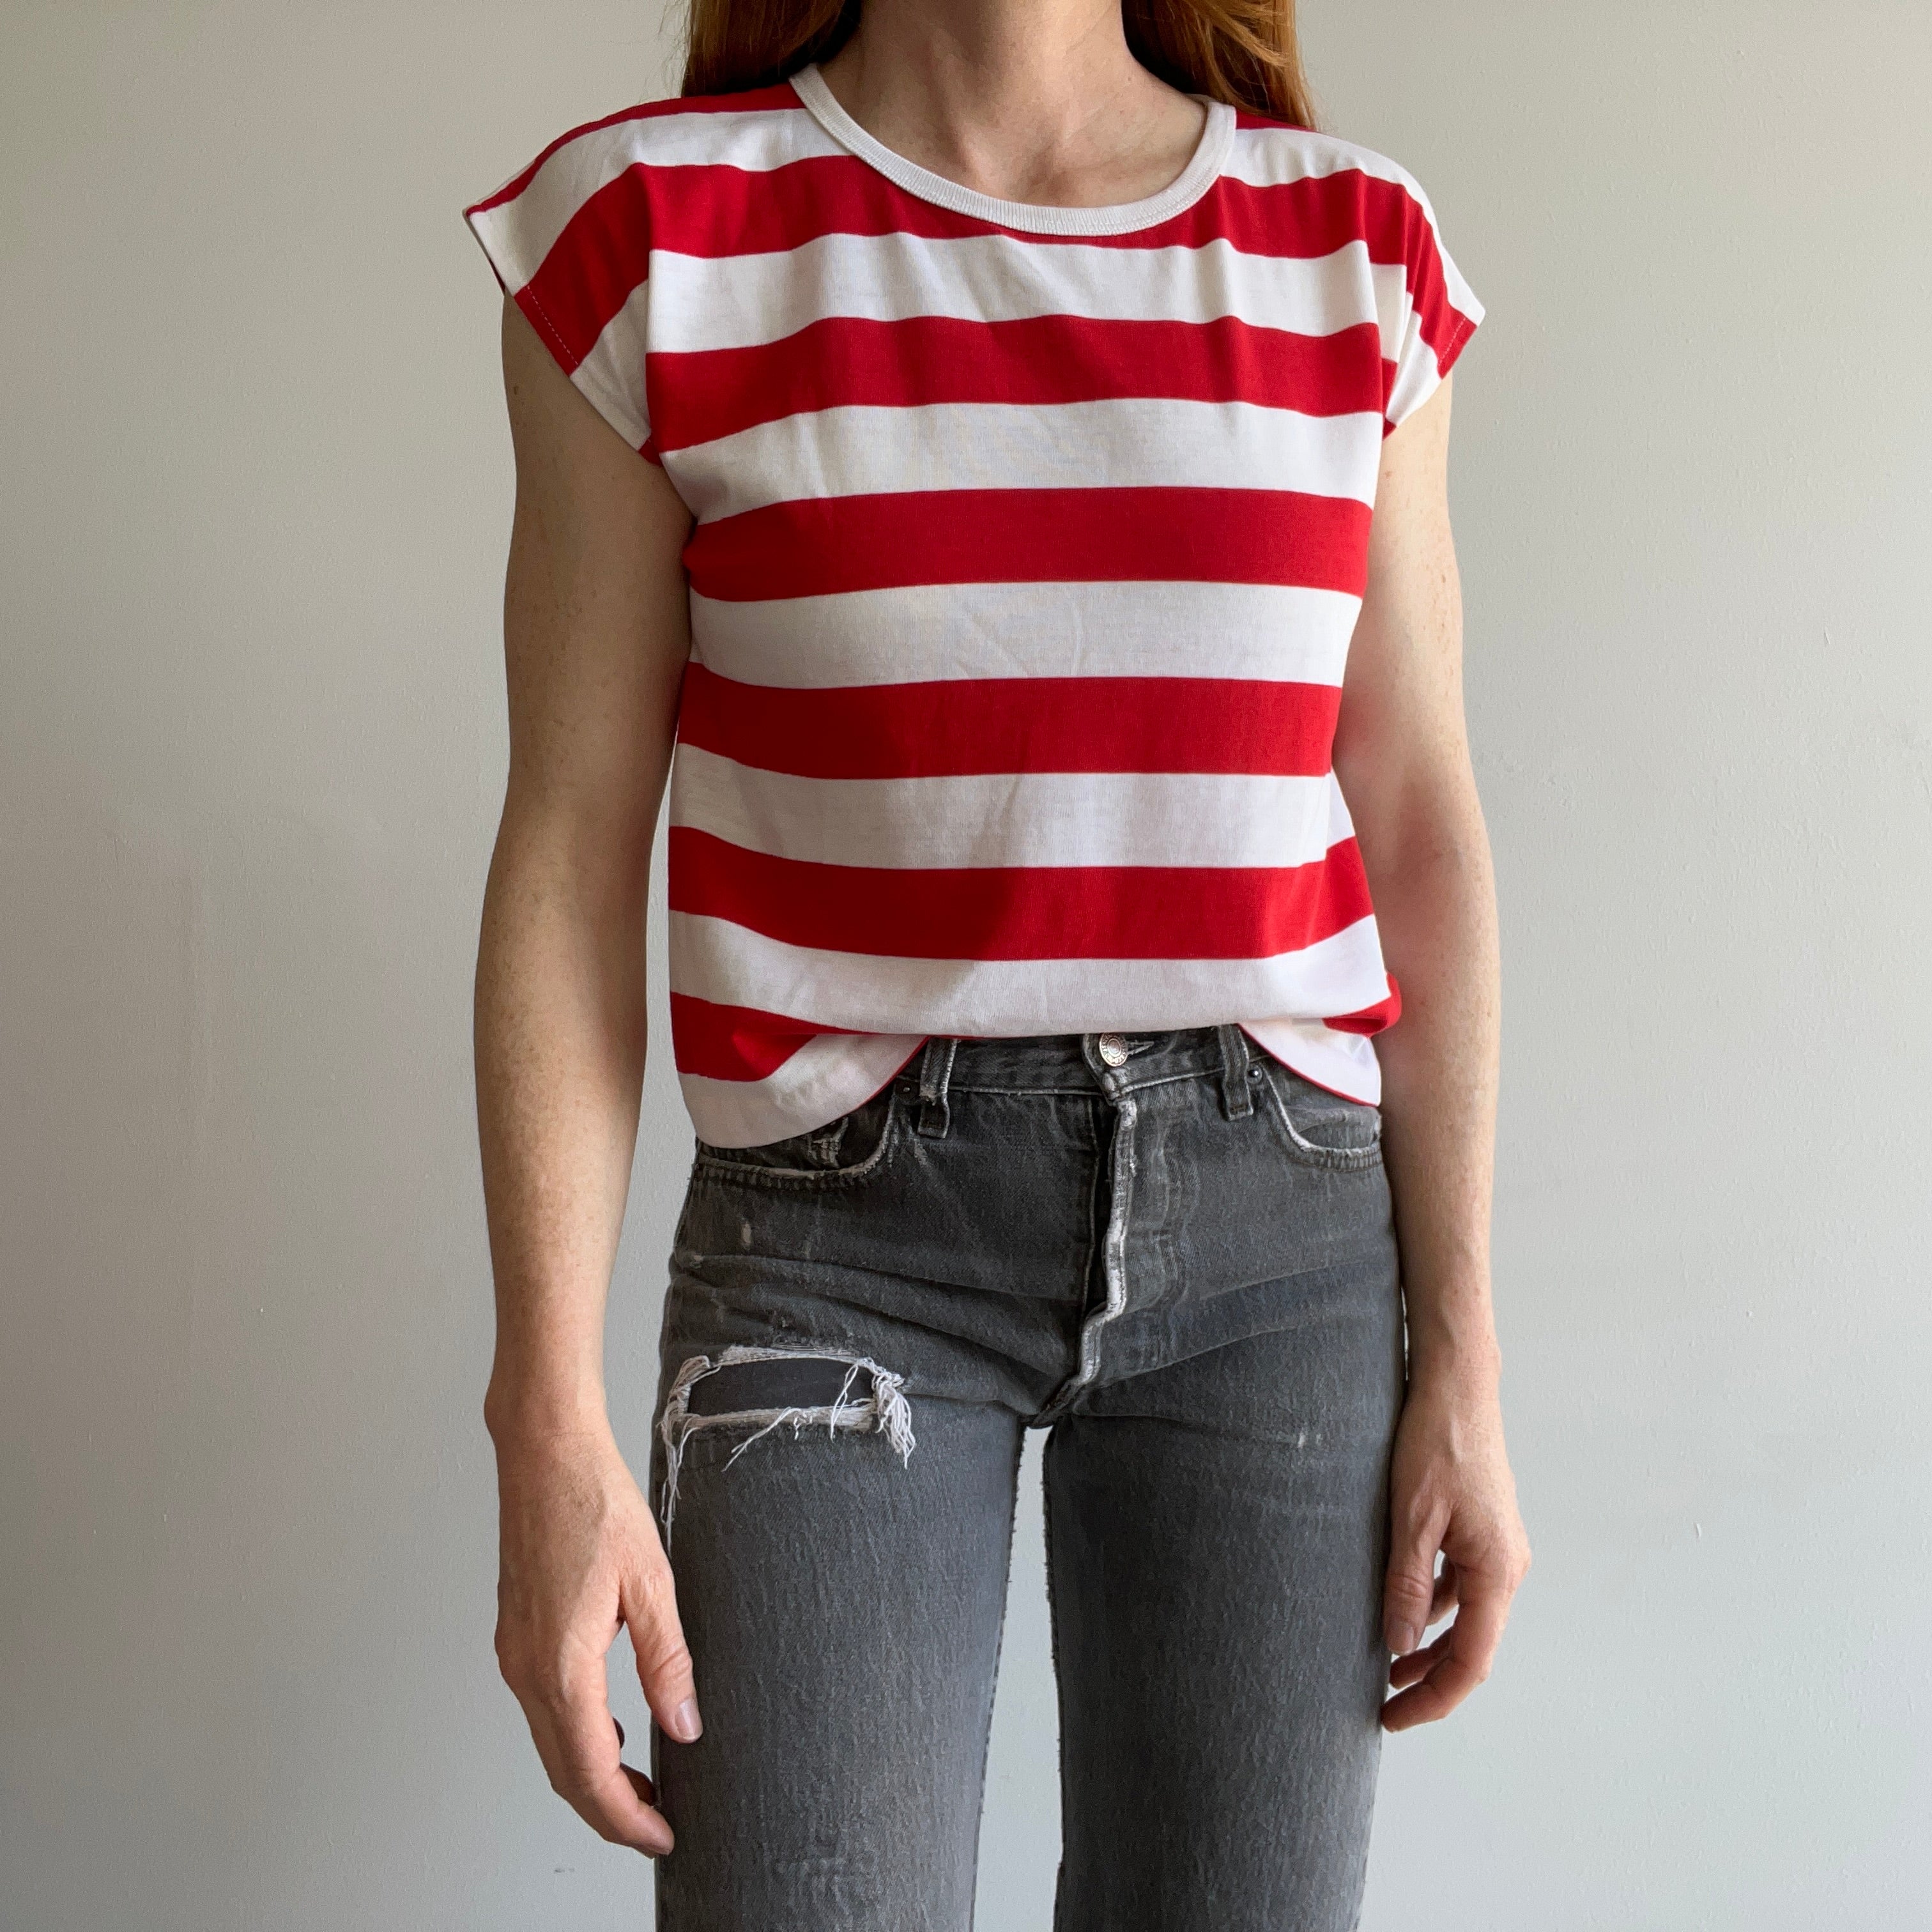 1980s Red and White Striped Thin Muscle Cut Shirt